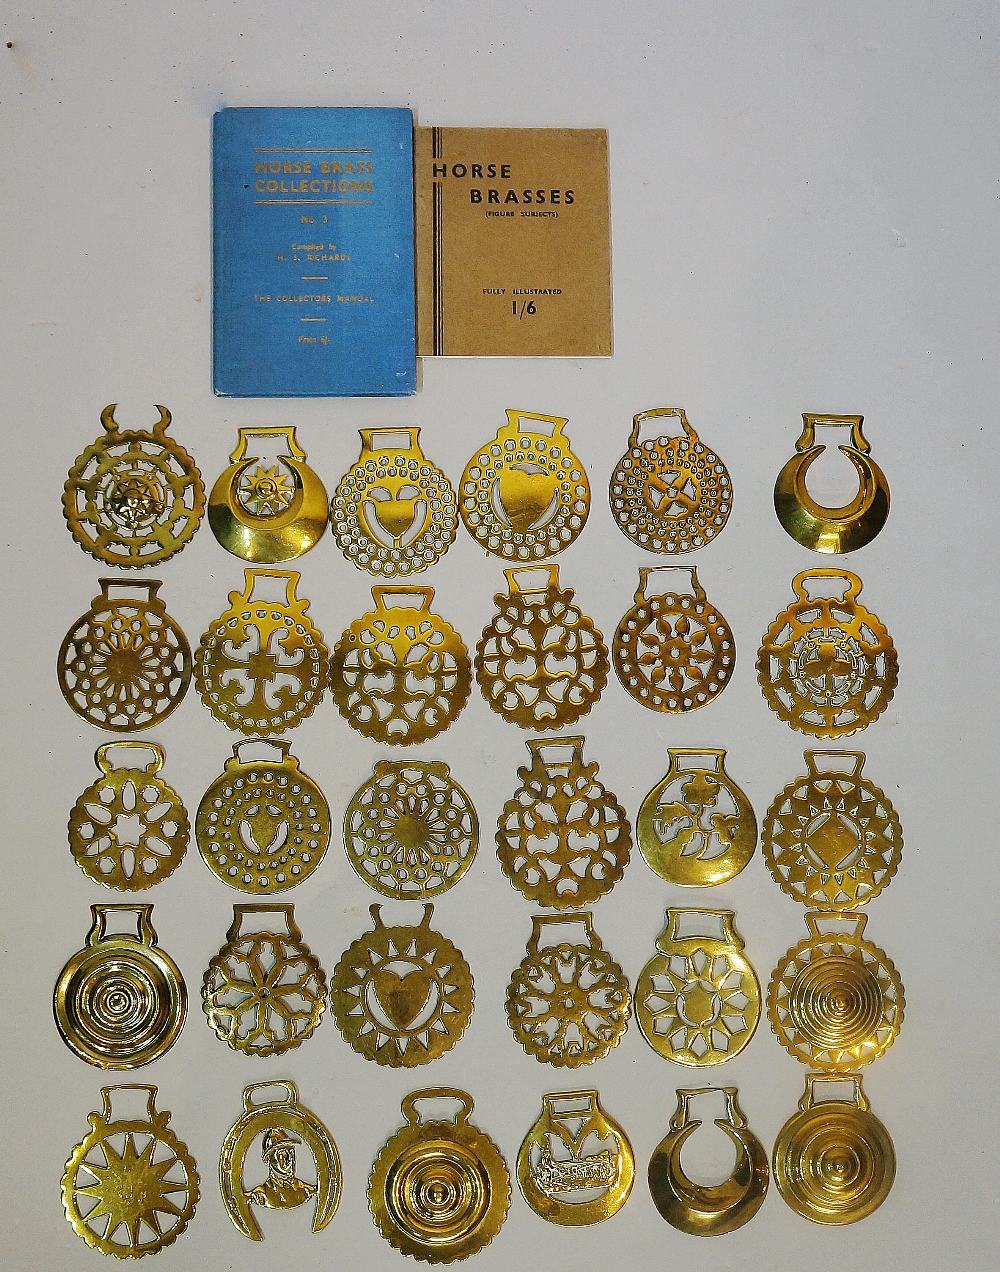 A quantity of horse brasses together with two books,